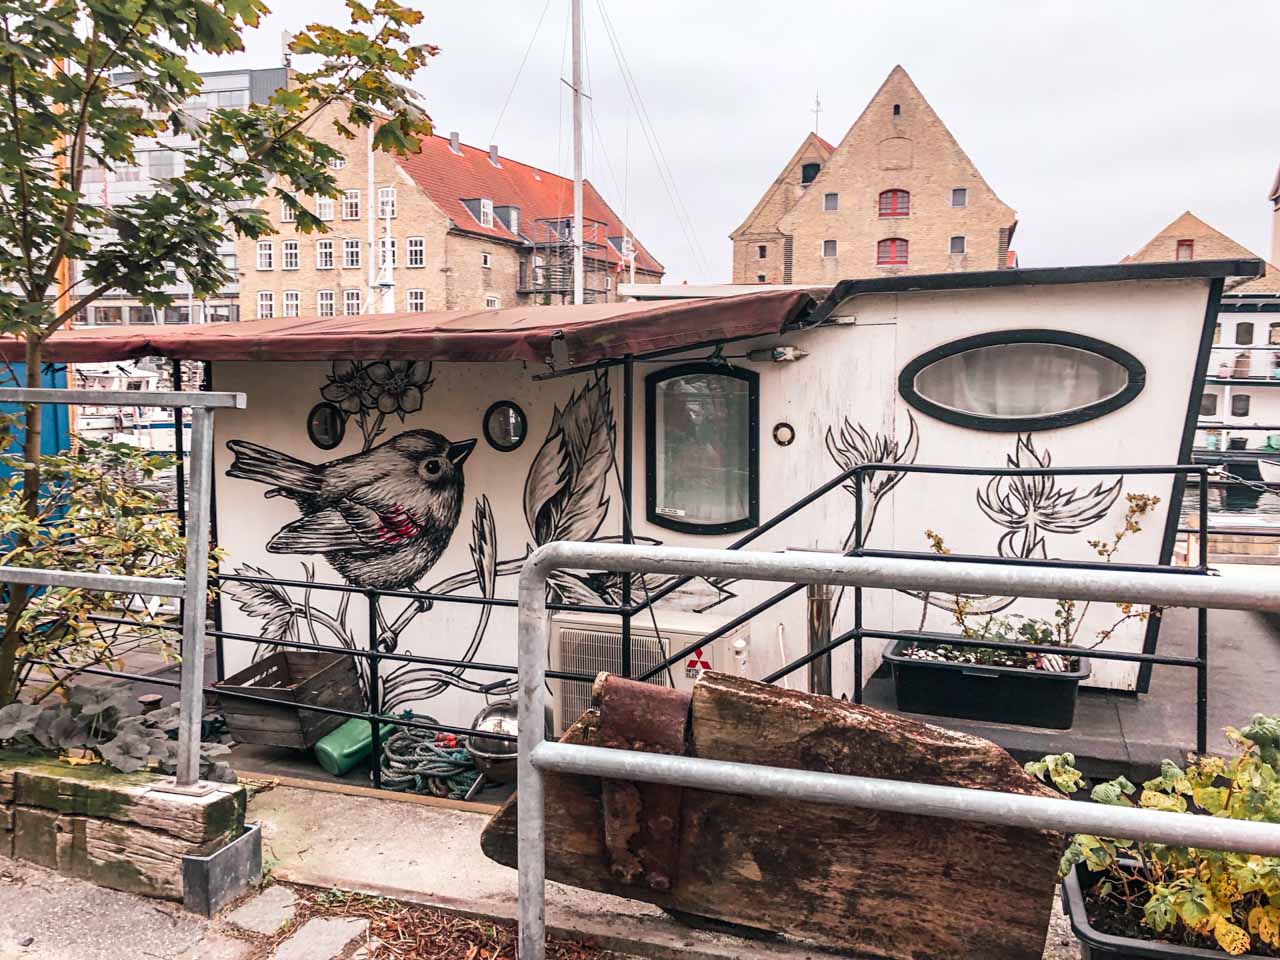 A boat with painted walls docked in the canal in Copenhagen, Denmark